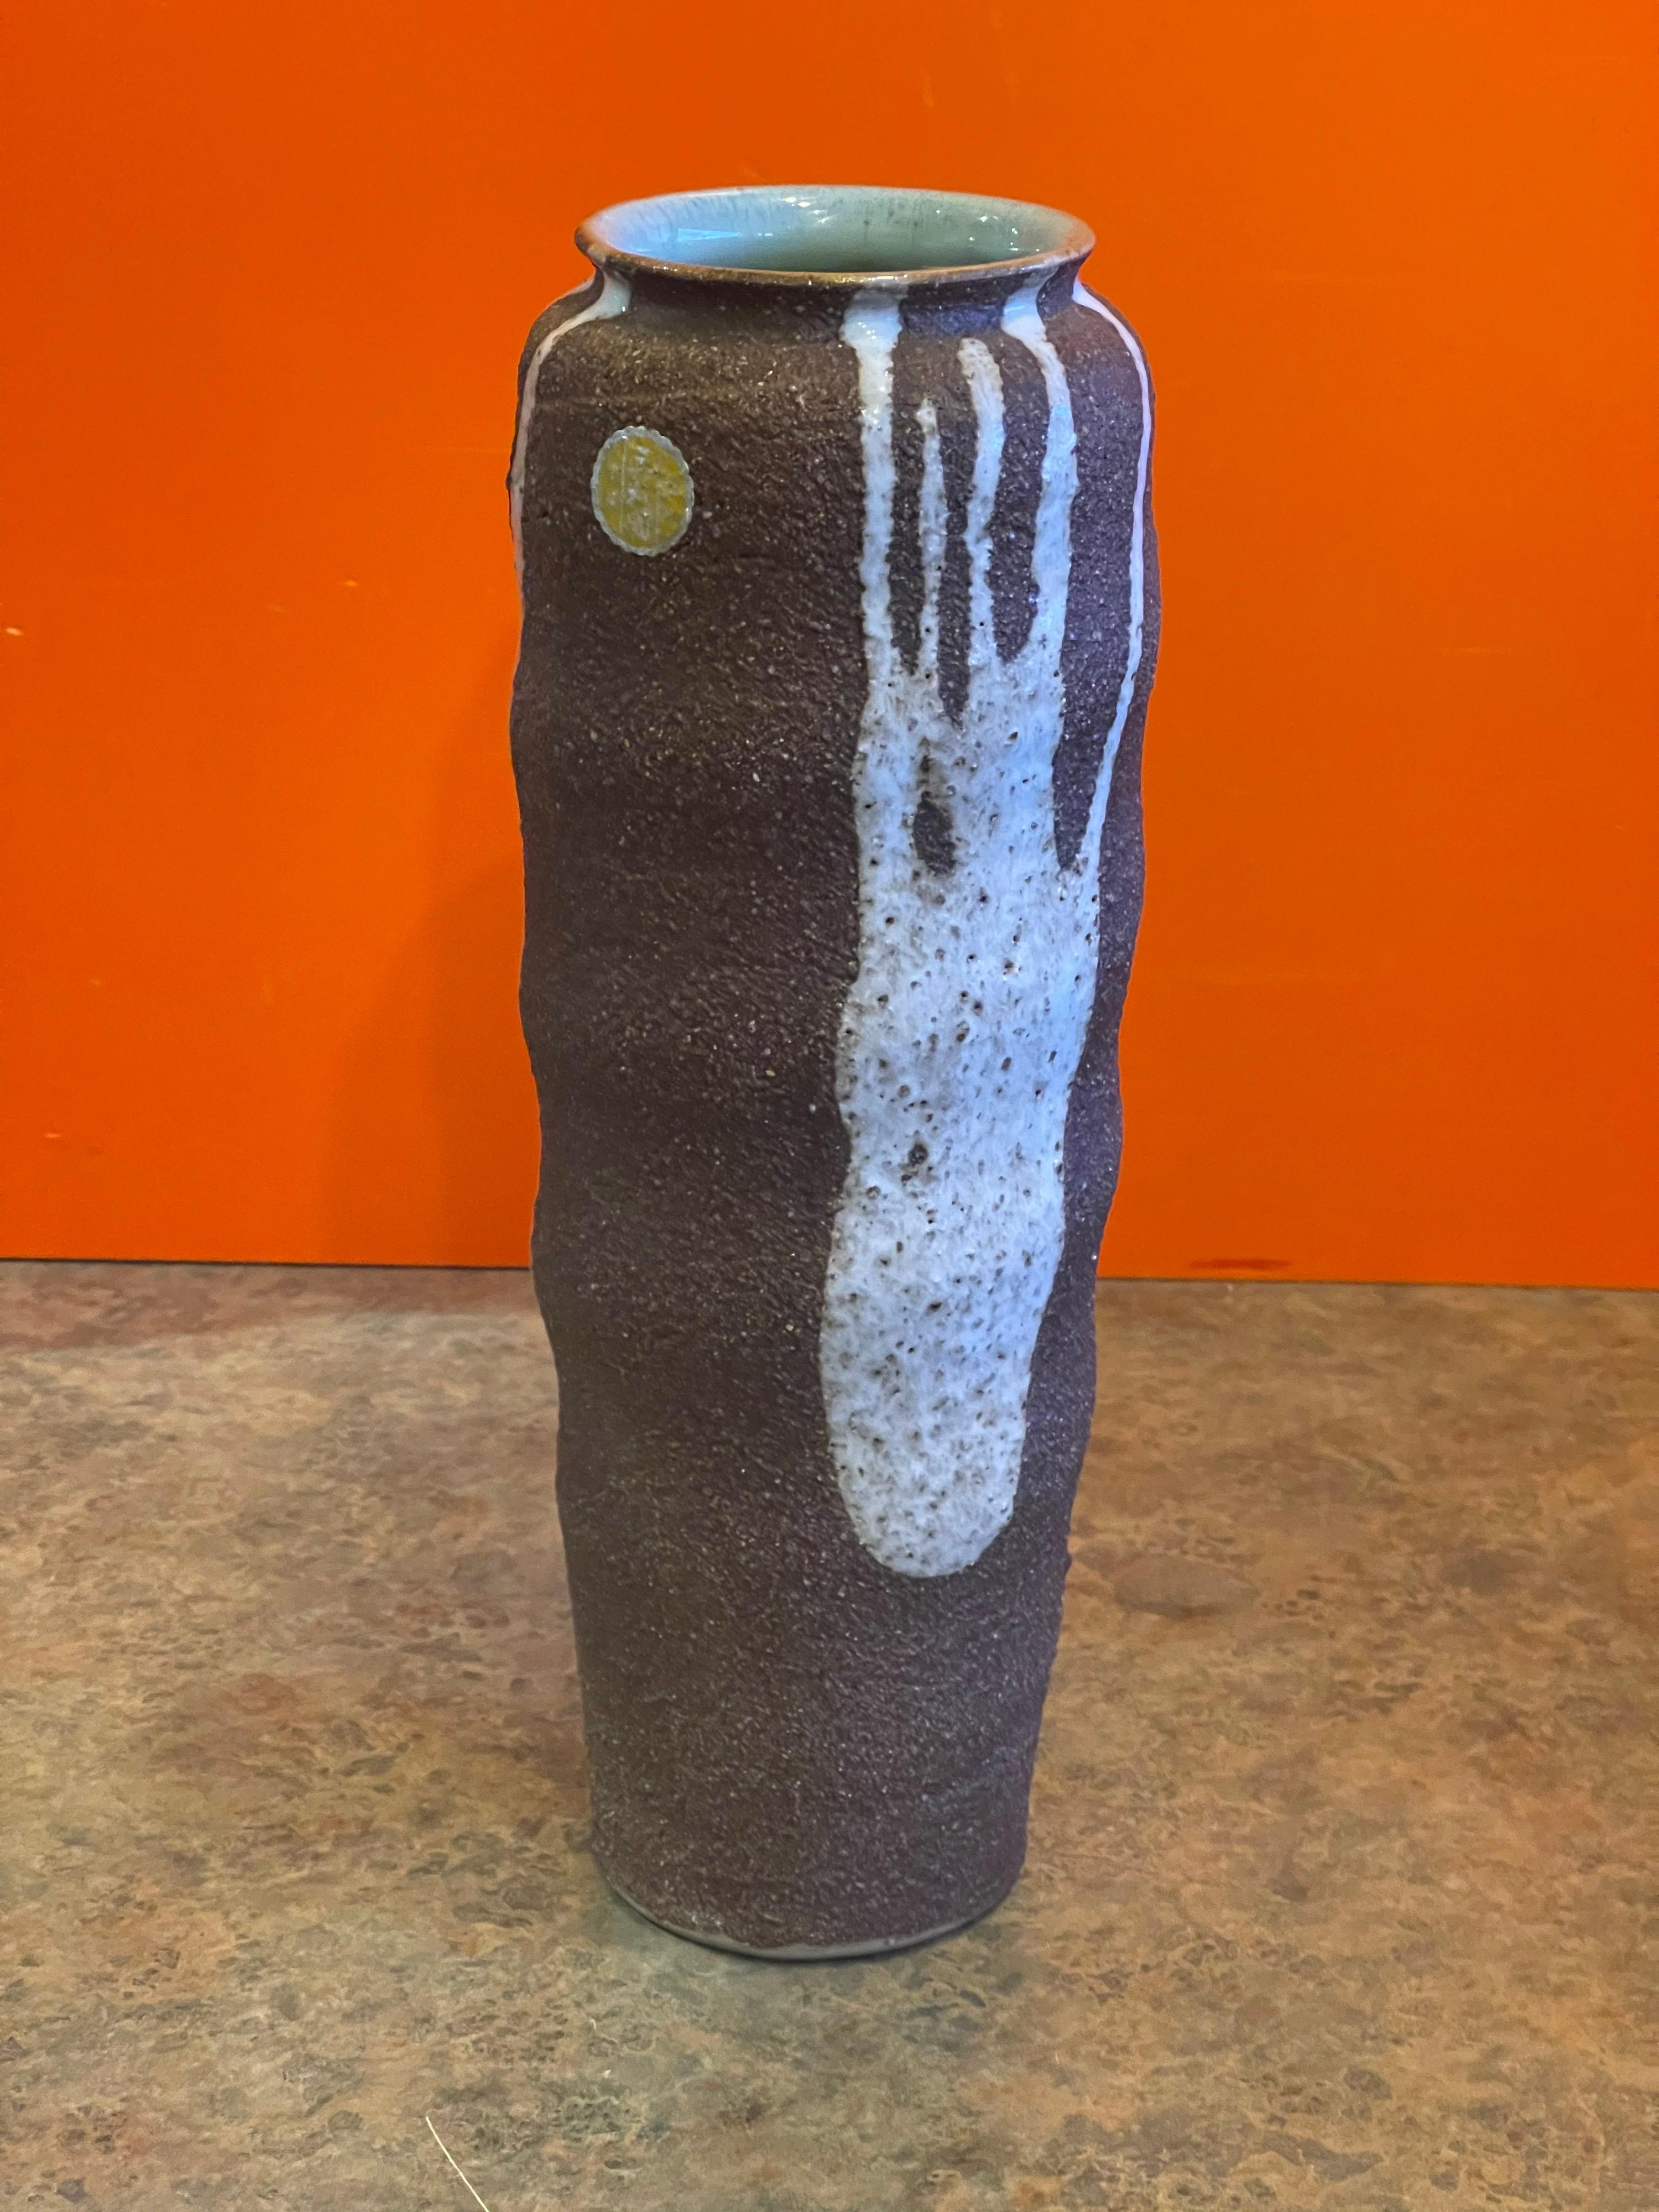 Mid-century earthenware pottery vase with drip glaze, circa 1970s. The vase was made in Japan and is in very good vintage with no chips or cracks; it measures 4.5